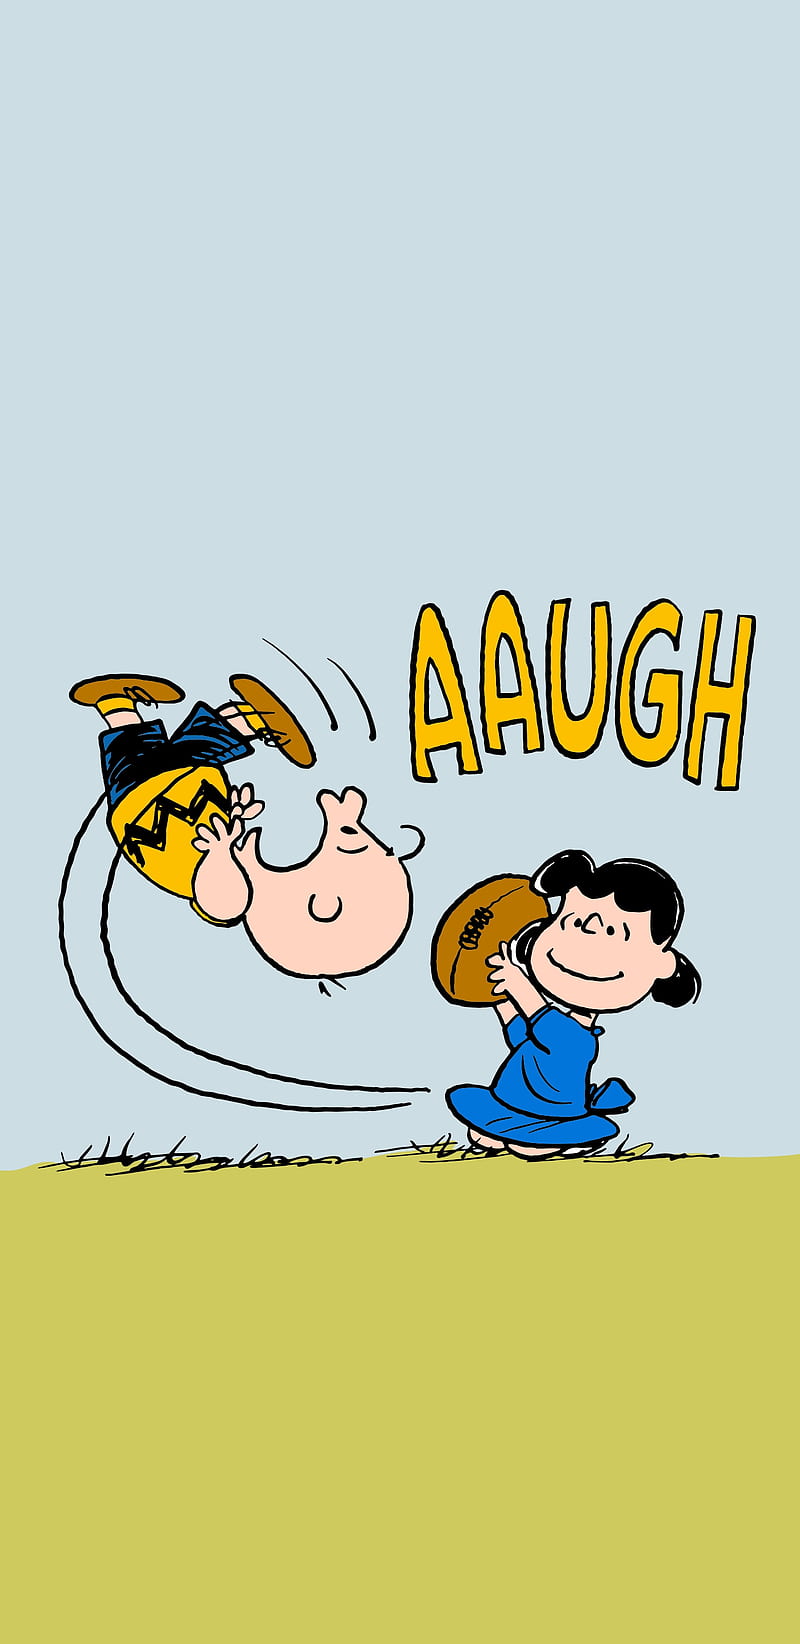 Fall Classic, aaugh, charlie brown, football, kick, lucy, miss, peanuts, snoopy, steve chavez, wraitude, HD phone wallpaper